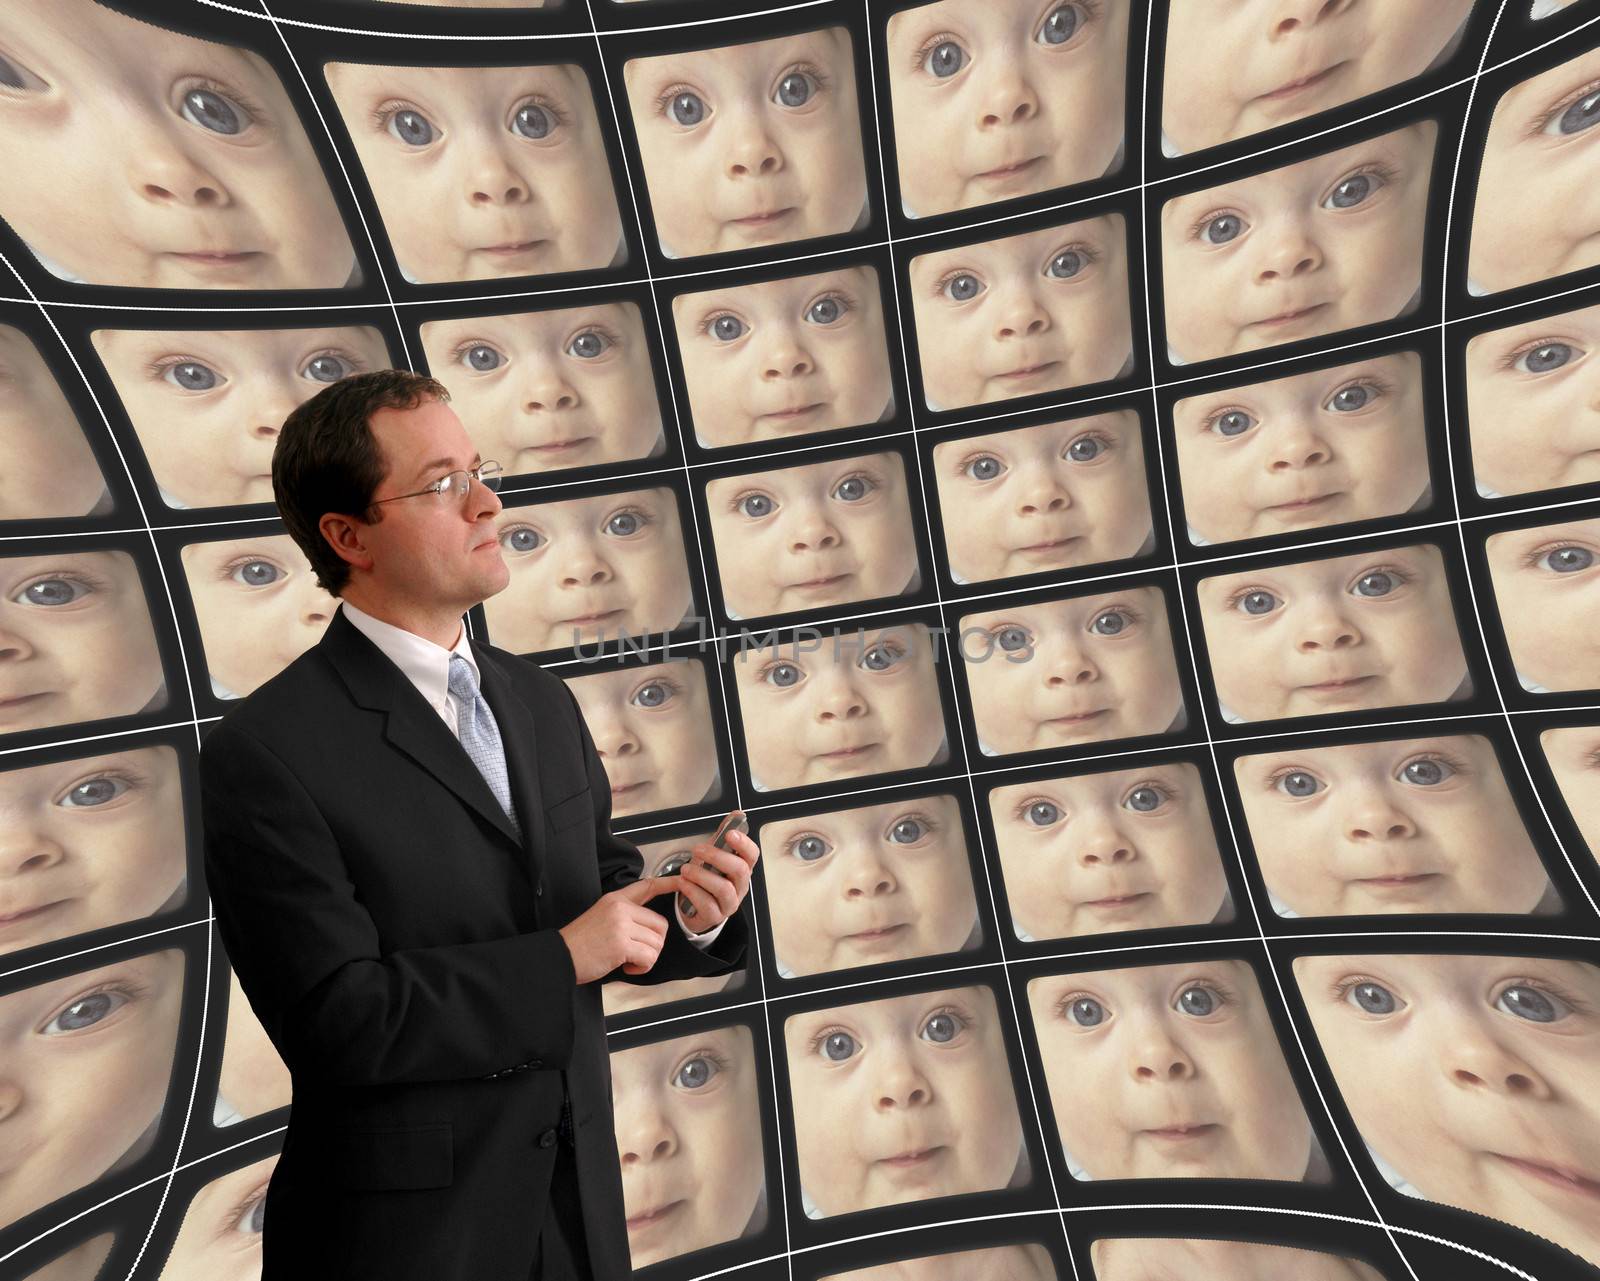 Man in suit monitoring babies on distorted video screens